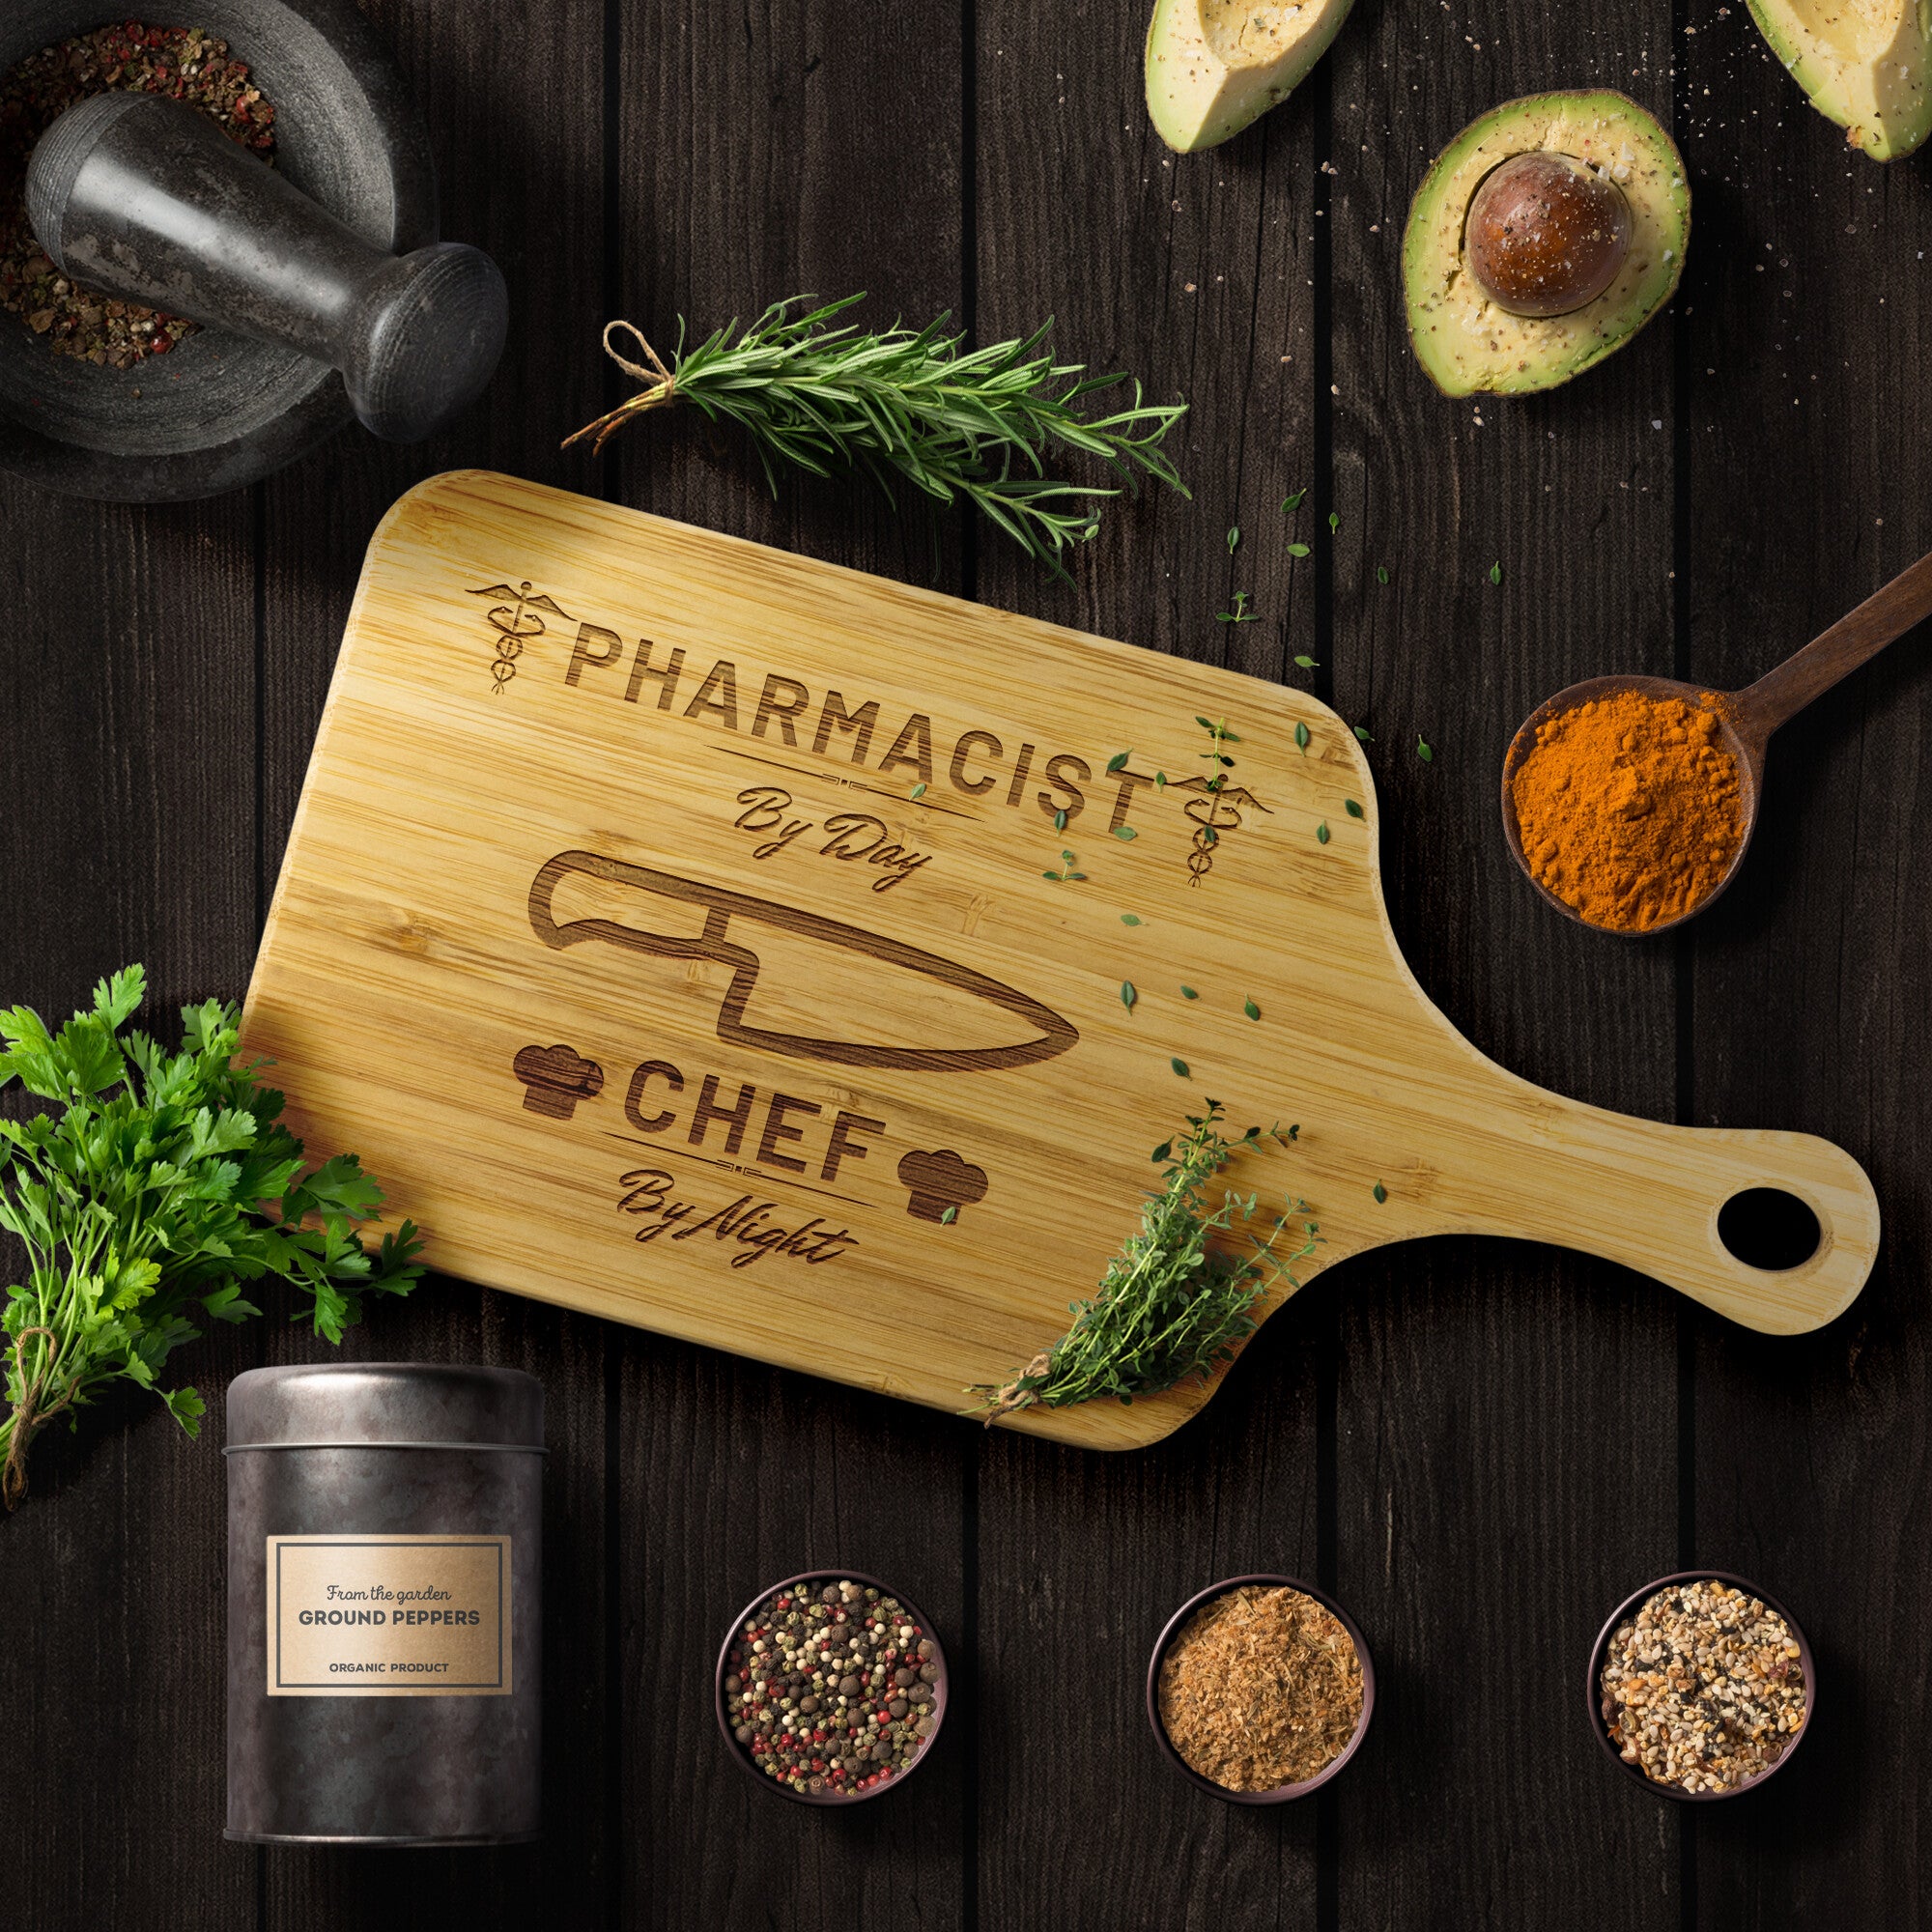 Pharmacist By Day Chef By Night Cutting Board | Kitchen Present For Pharmacy Professional